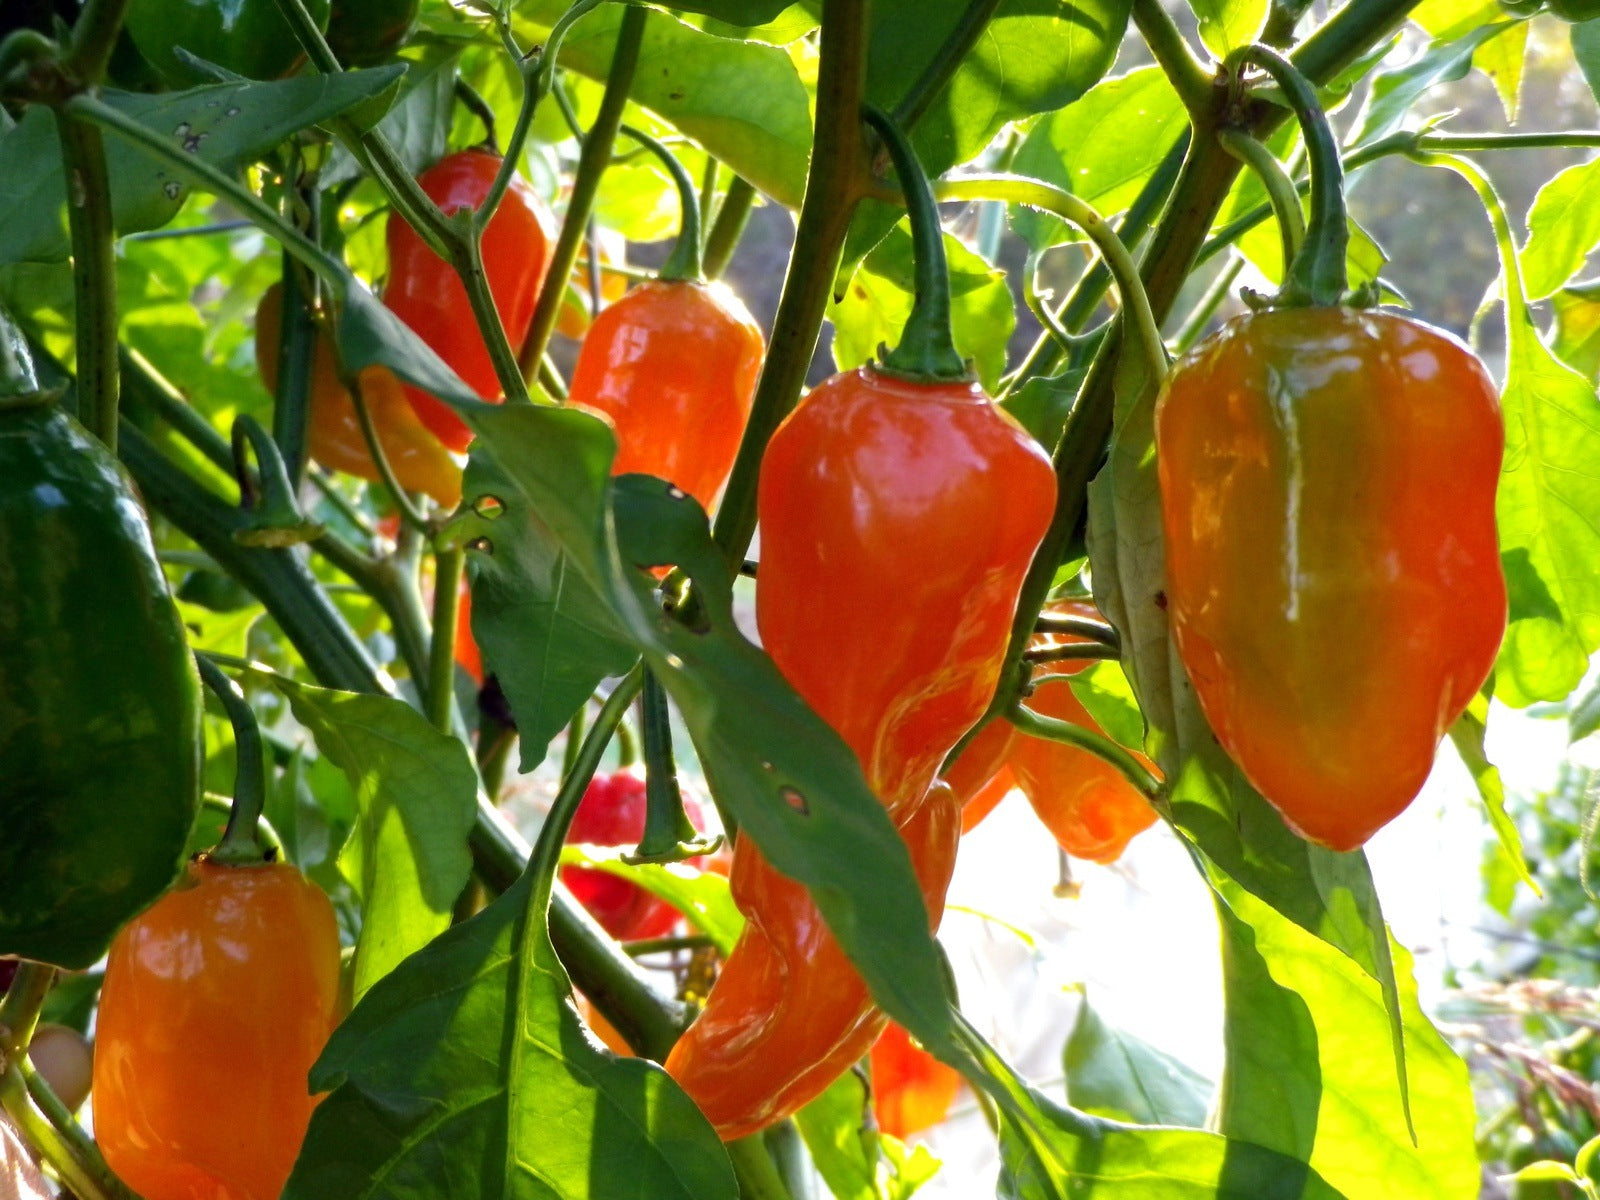 Habenero Hot Pepper, 25 Heirloom Seeds Per Packet, Non GMO Seeds